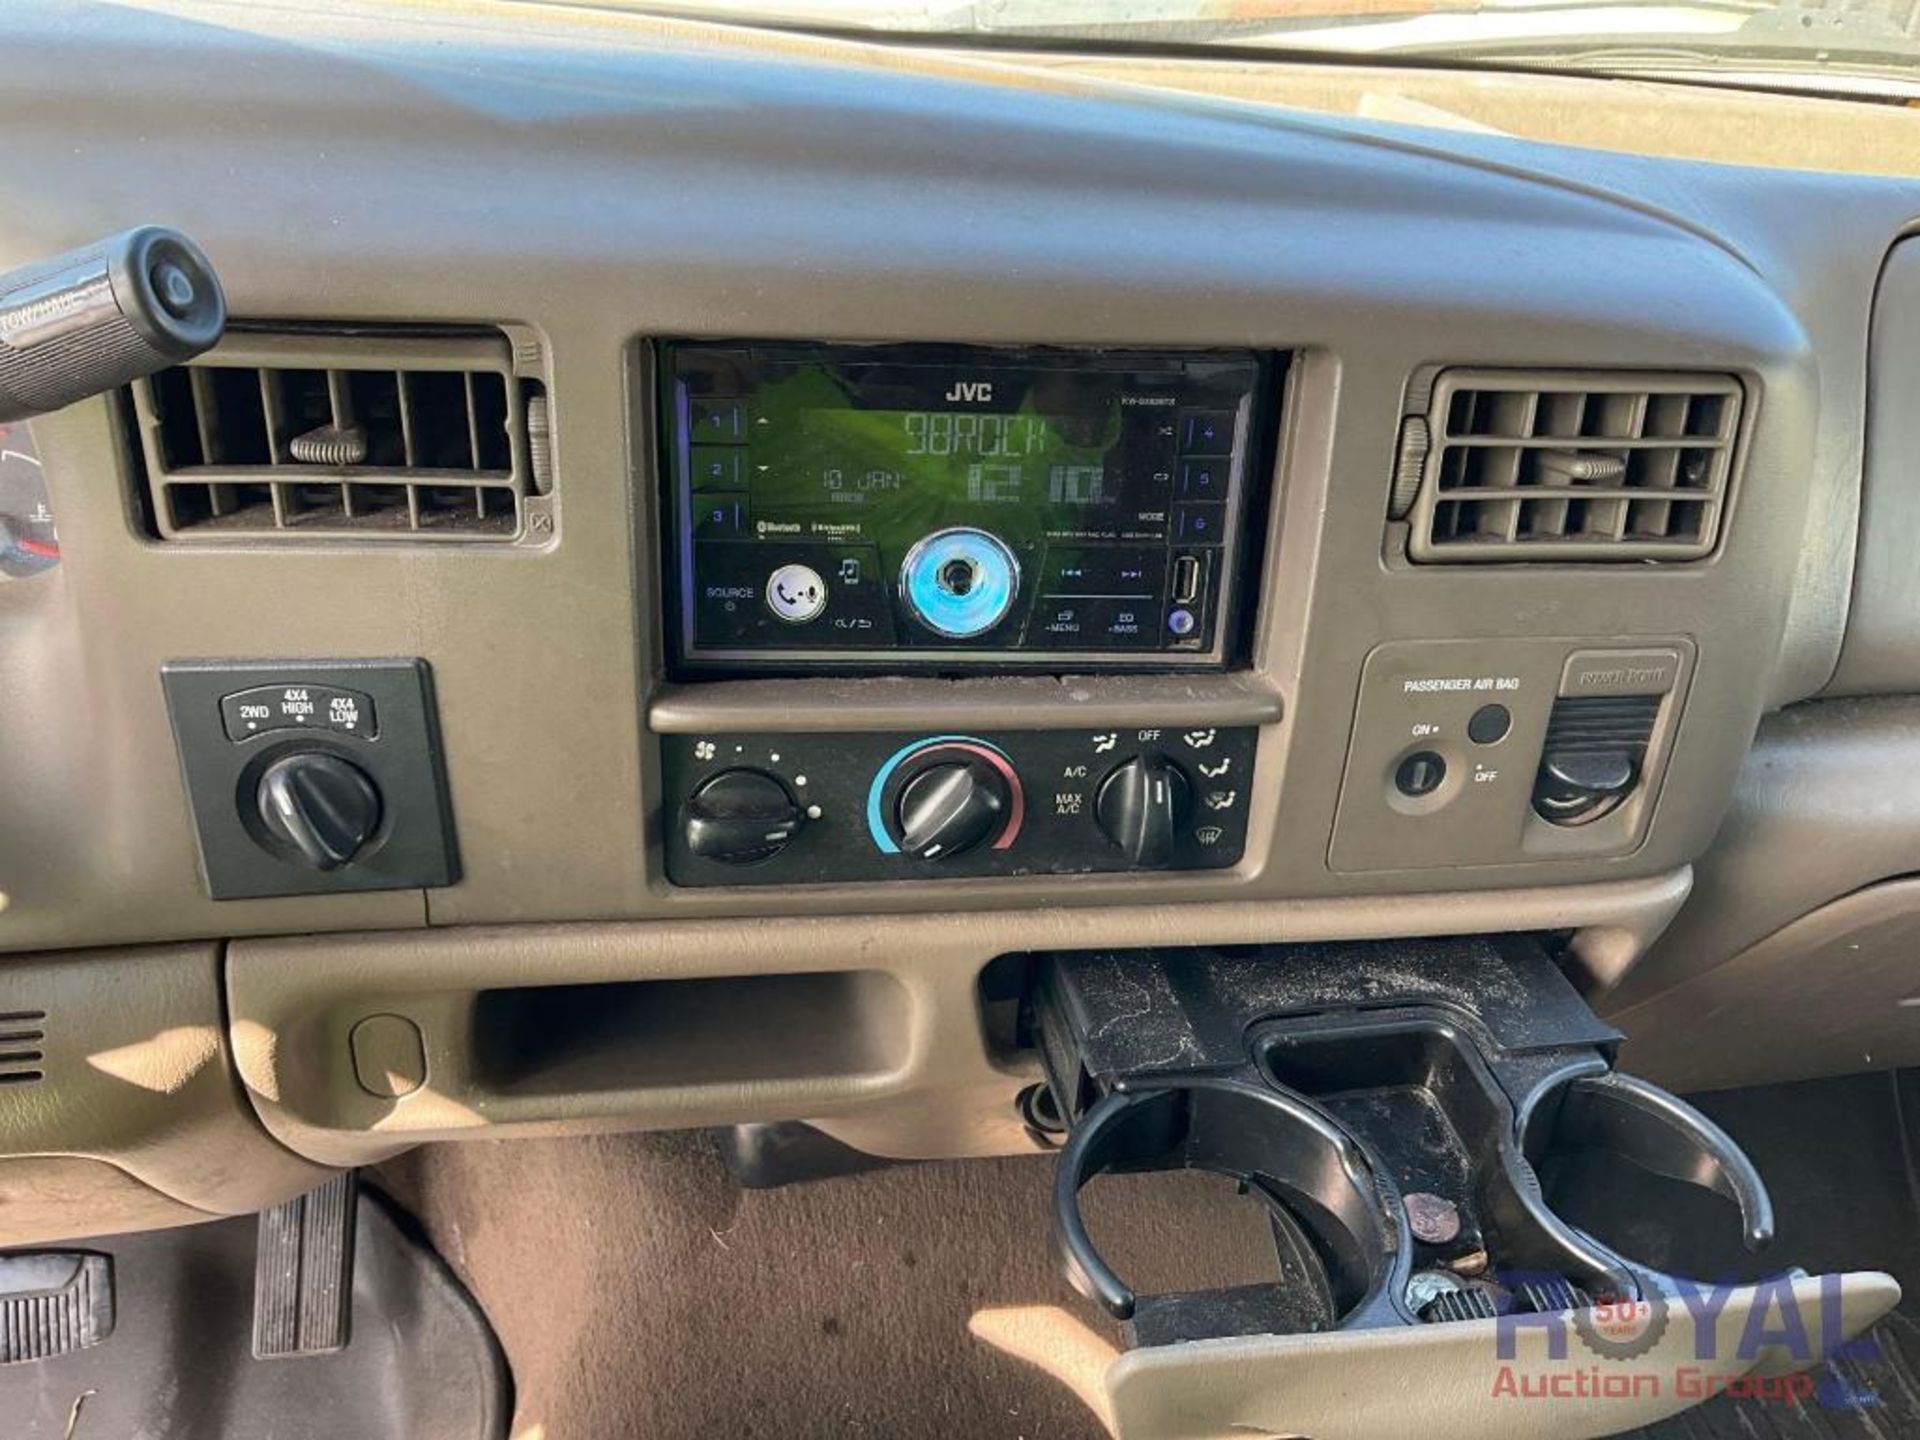 2003 Ford F250 4x4 Pickup Truck - Image 18 of 25